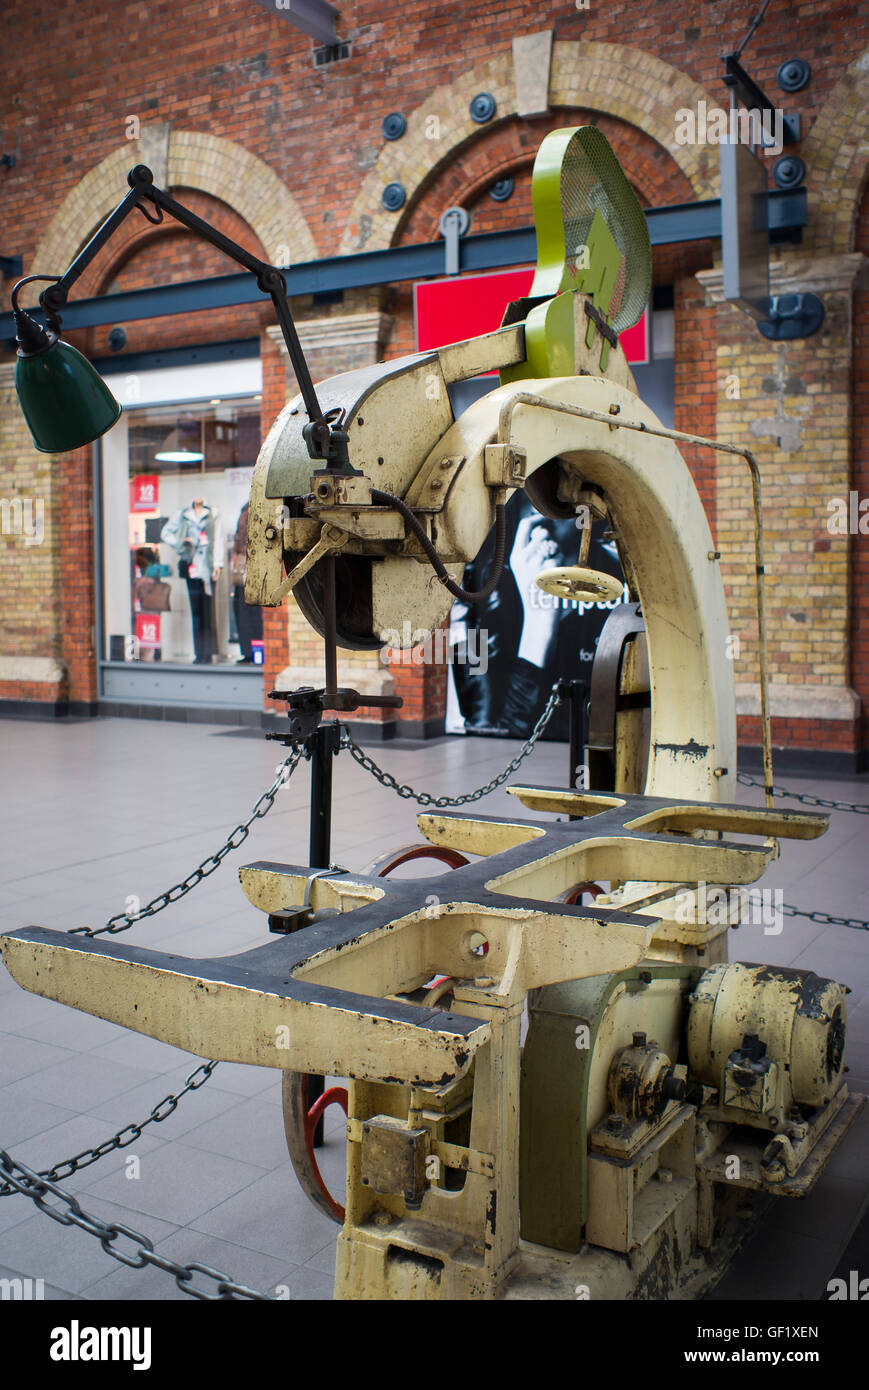 Old industrial machine retained in new Outlet Centre as a relic of the past activity in the former GWR railway works in Swindon Stock Photo